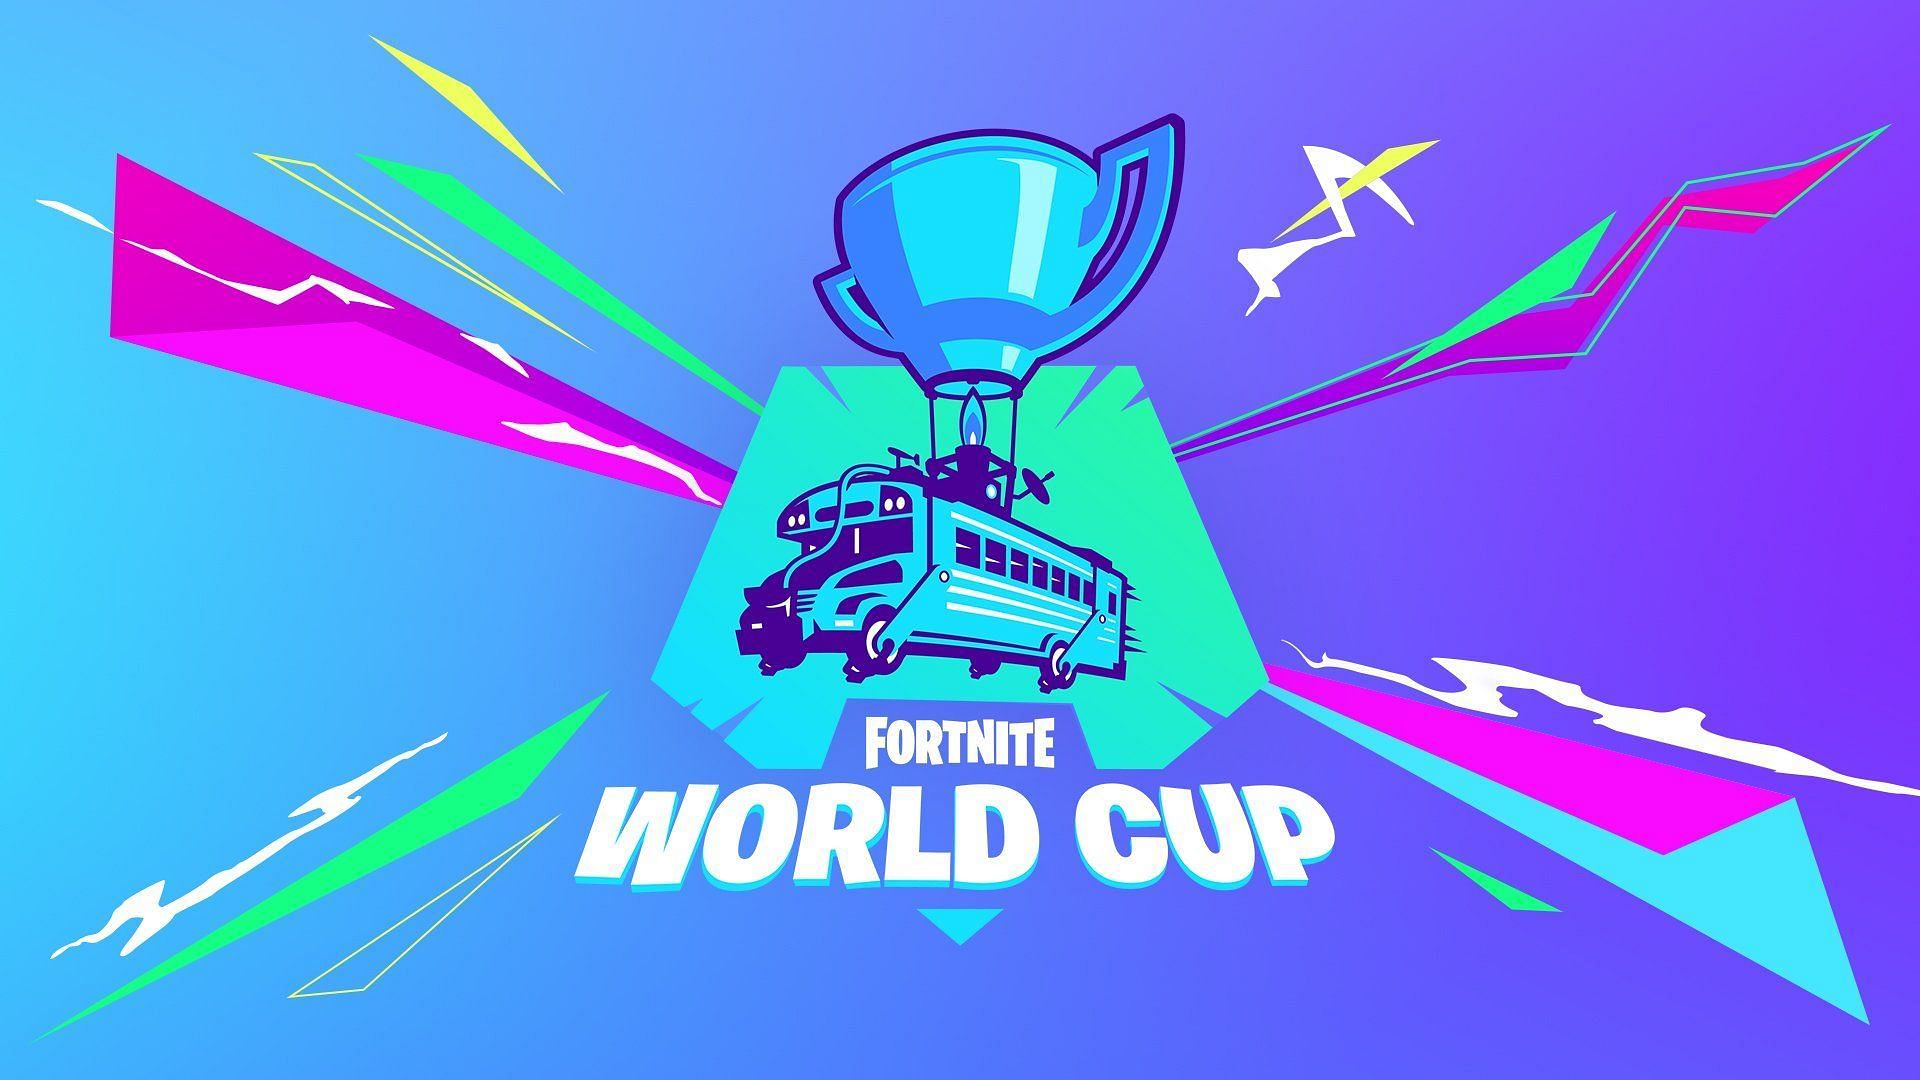 Fortnite World Cup 2022 is returning soon!